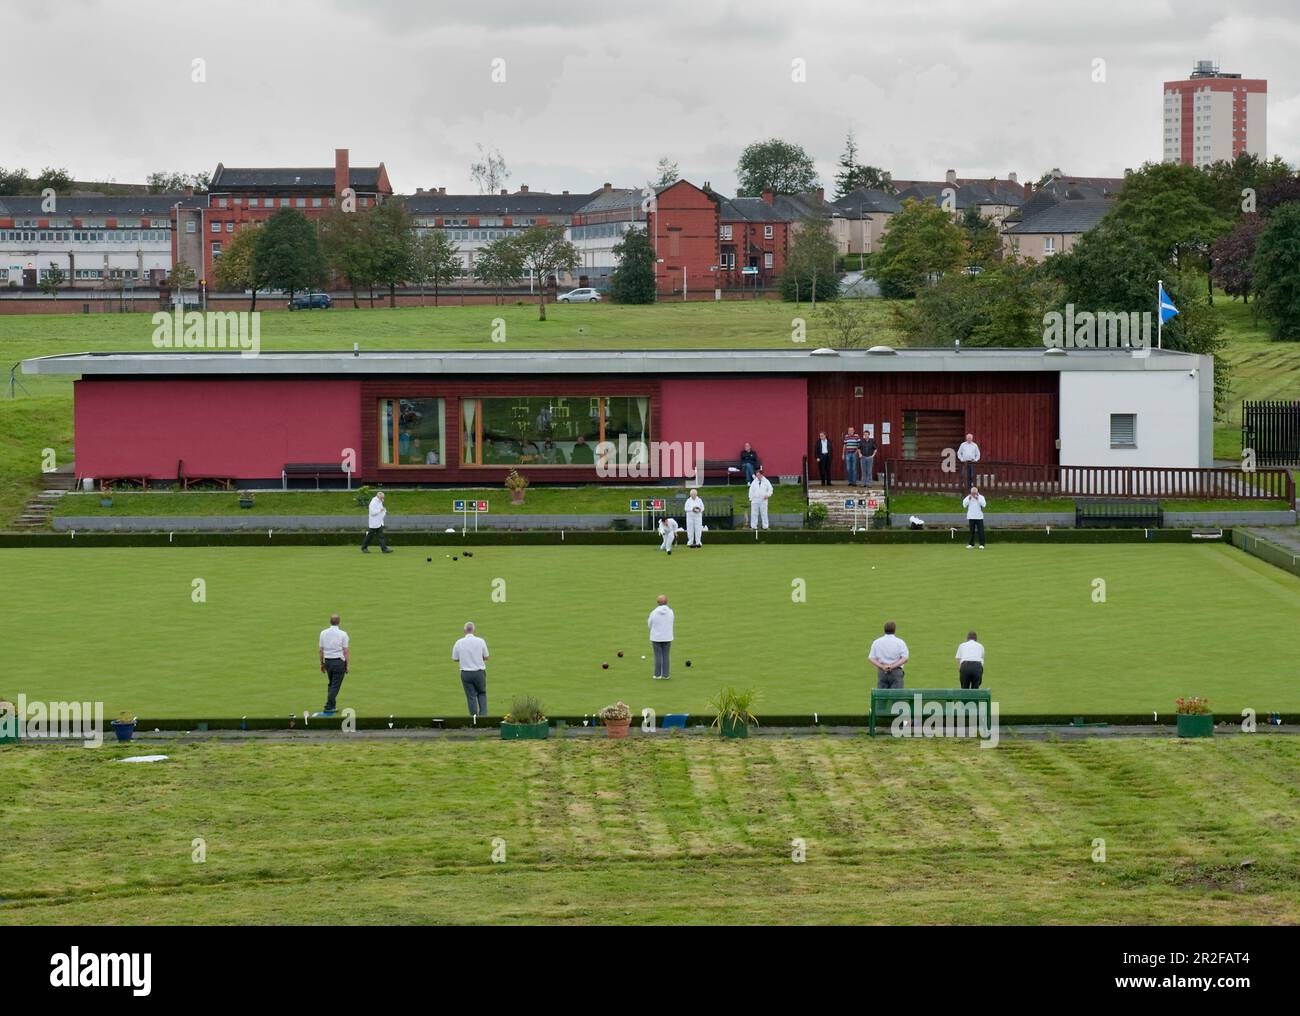 Bowls in play within the urban enivornment in front of the red pavilion clubhouse at the Balornock lawn bowling green in Glasgow, Scotland, UK Stock Photo